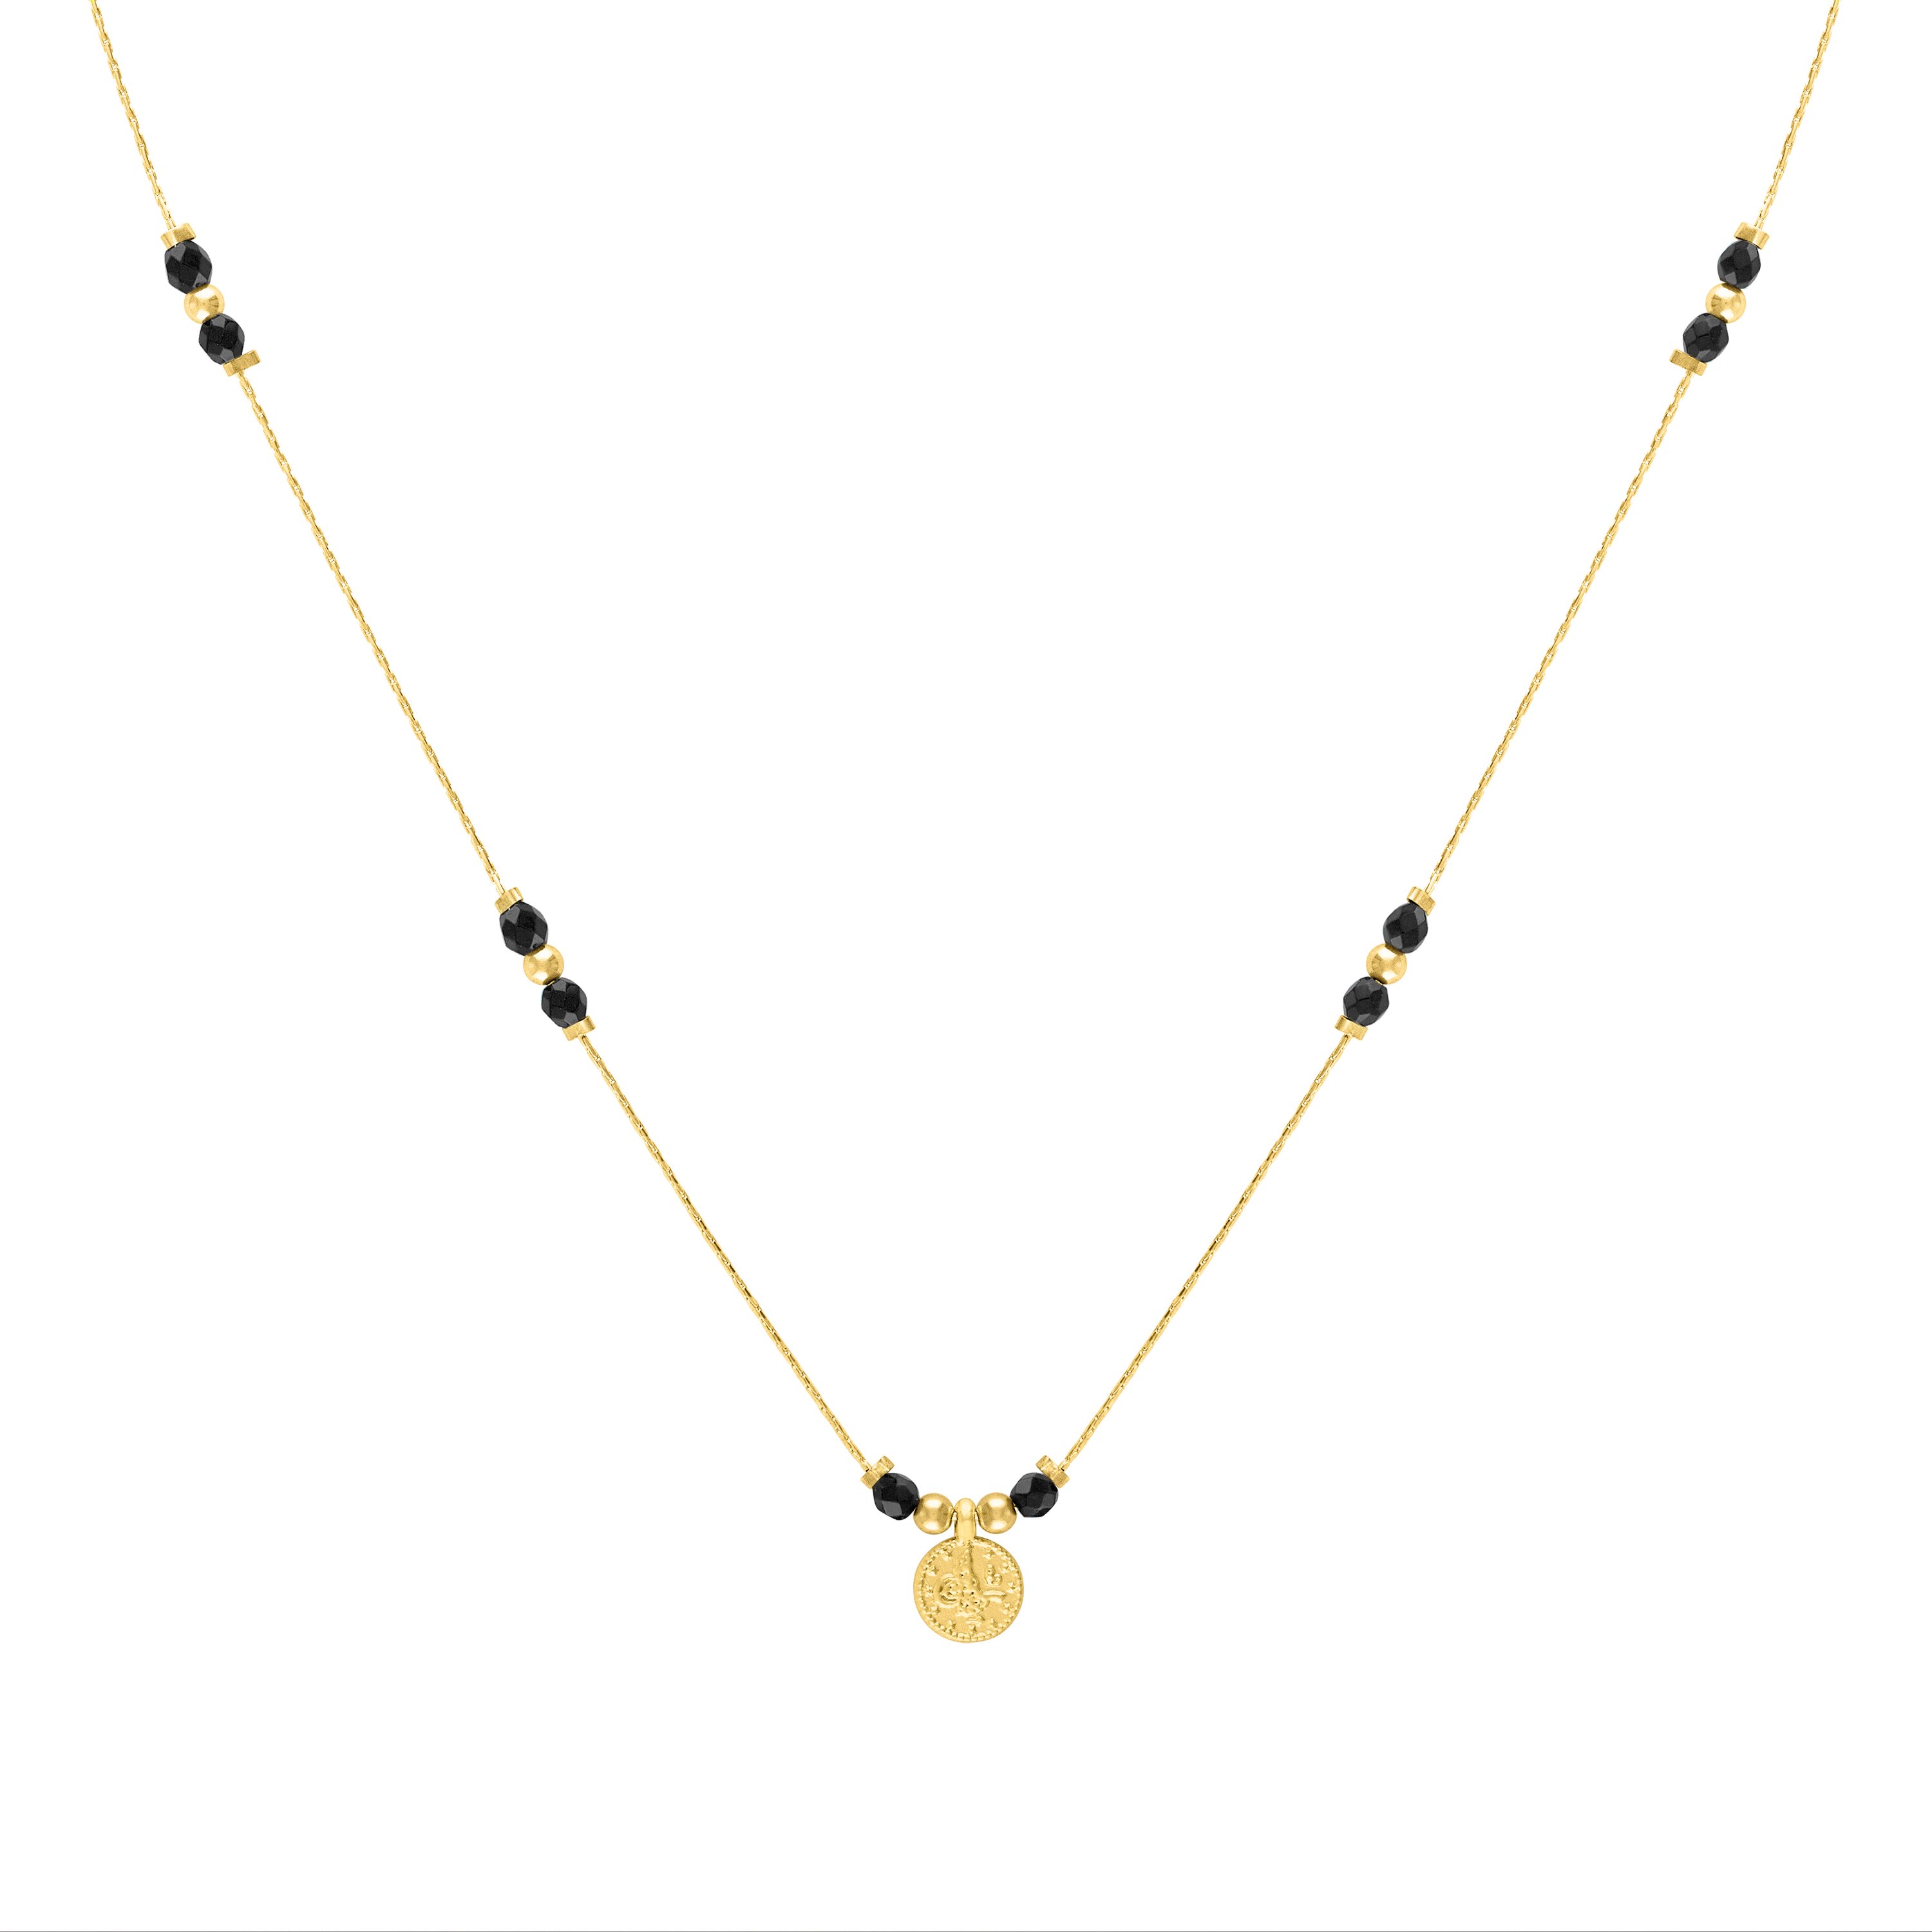 Olivia Le Journey Black Onyx Beaded Necklace With Coin In Gold